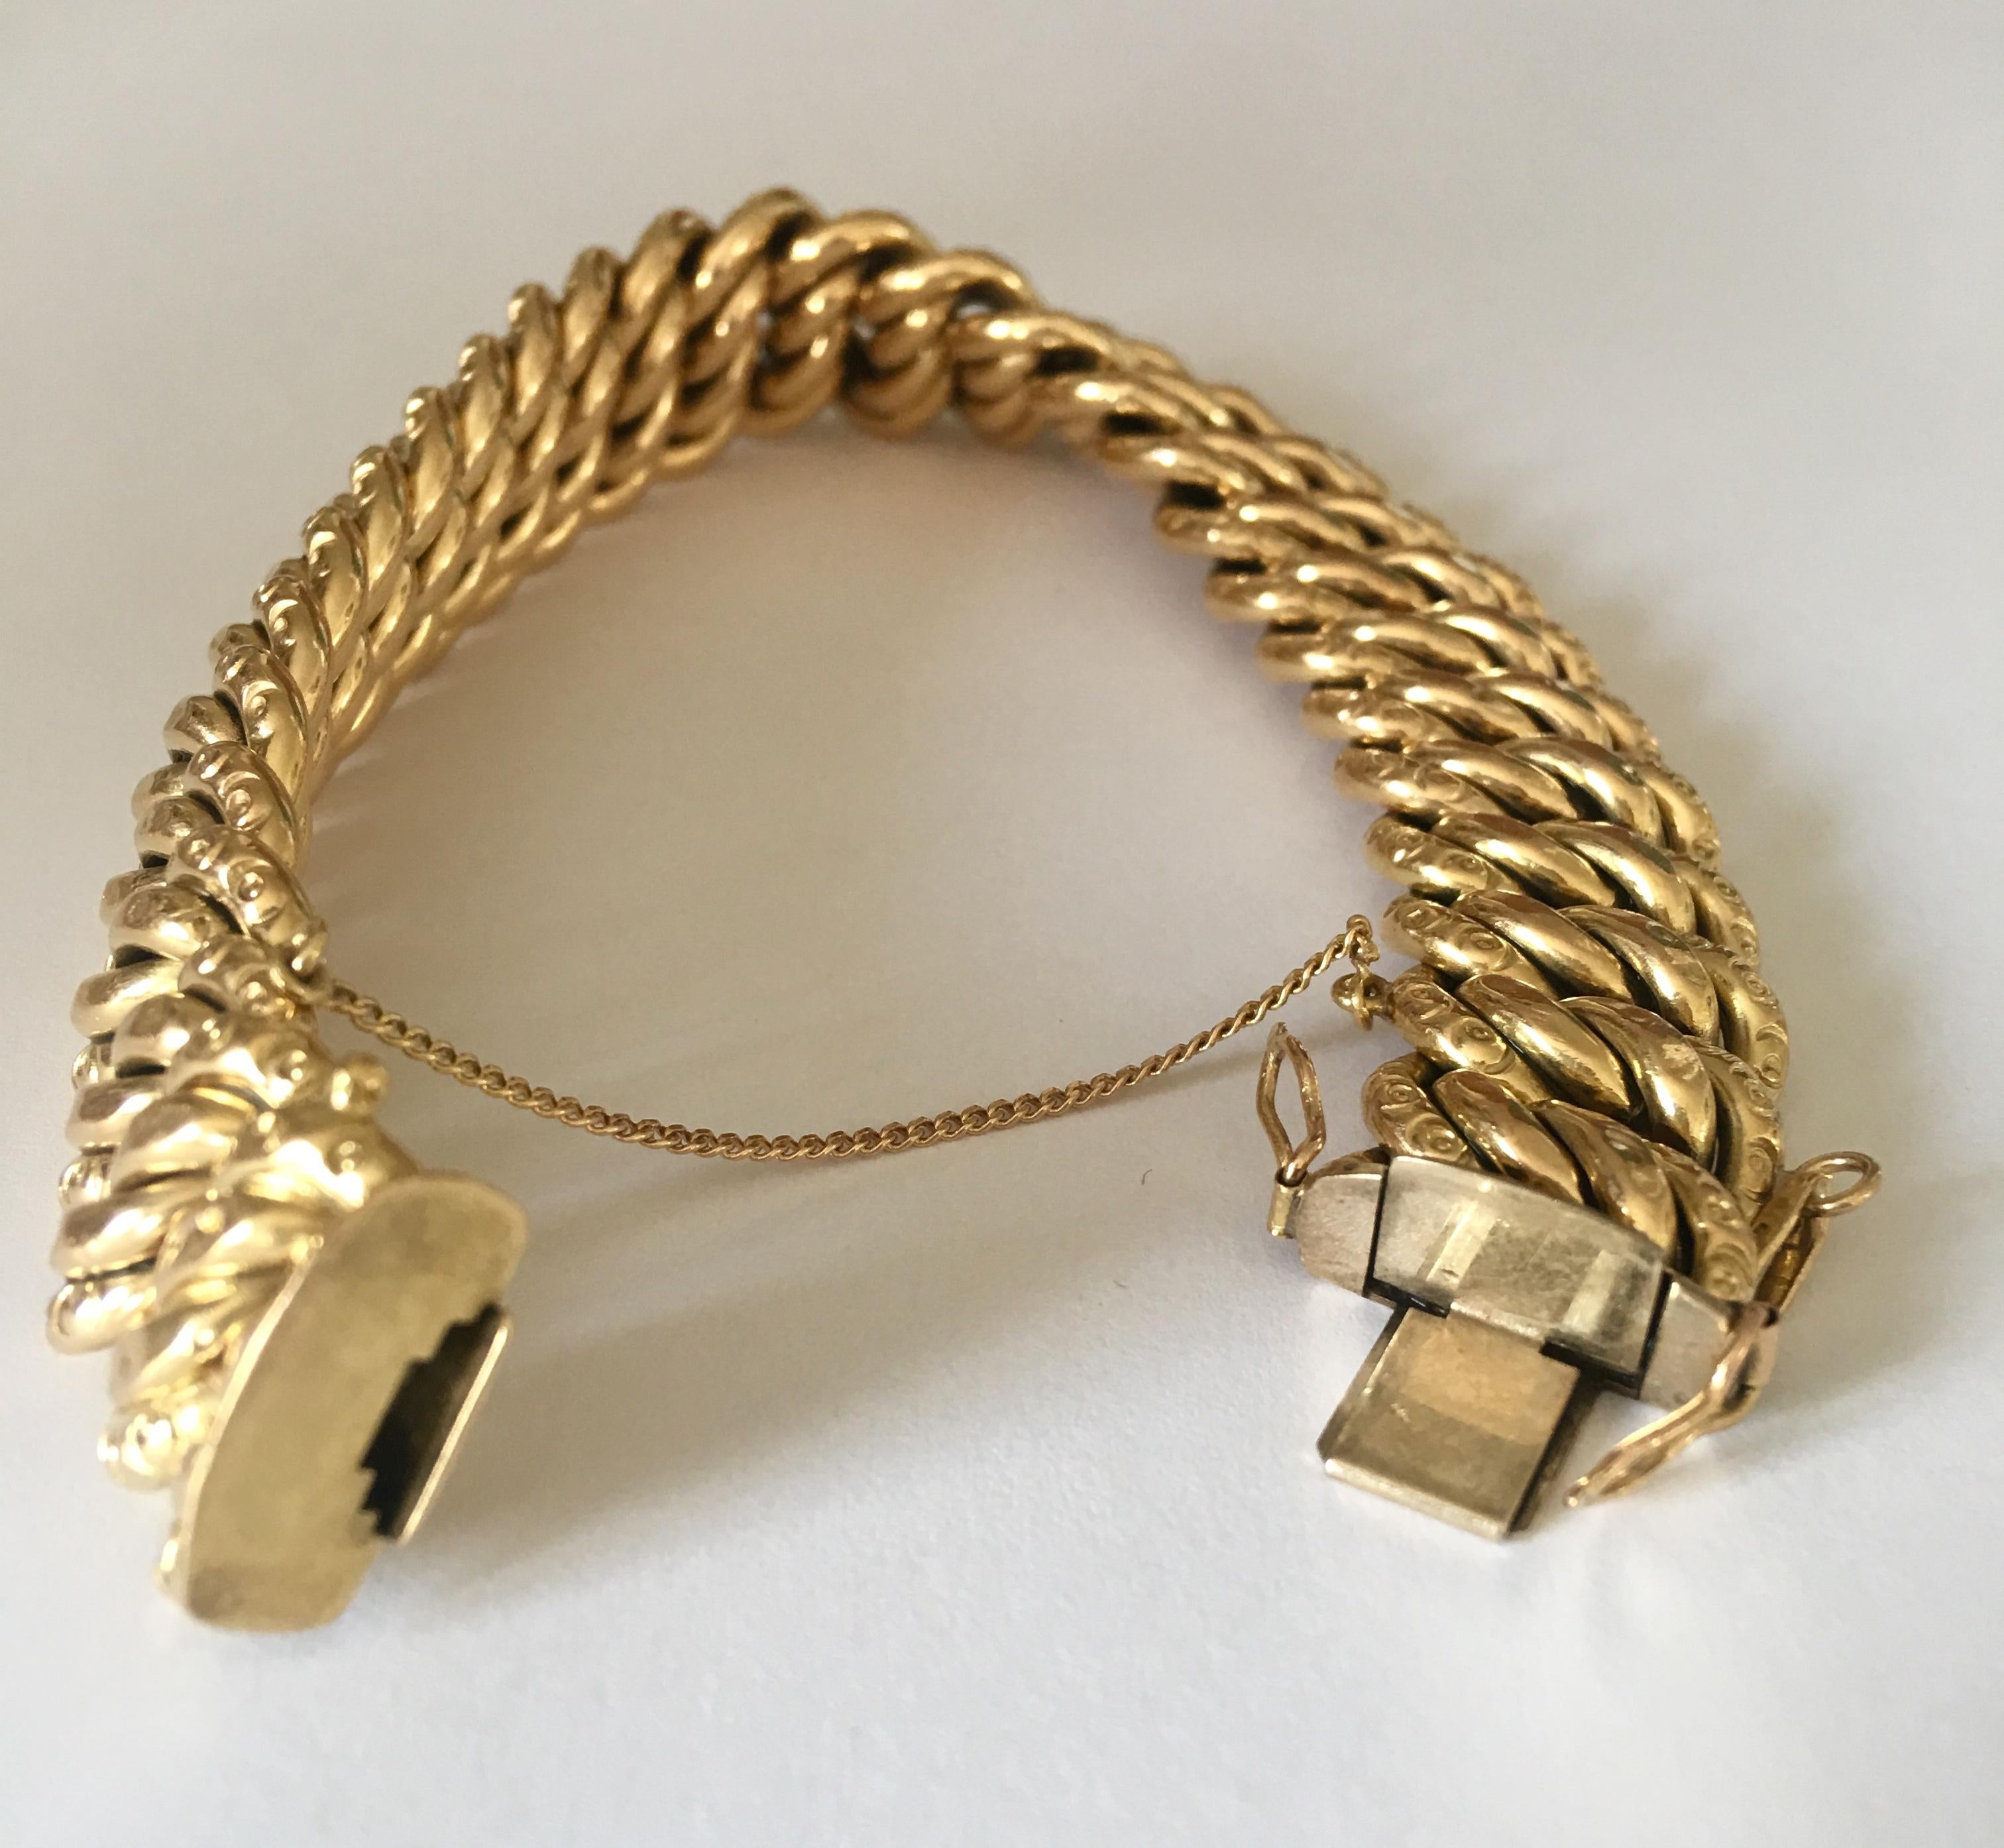 A fine and elegant vintage Cuff bracelet in 18 carats yellow gold.

Italy, circa 1970-1980
